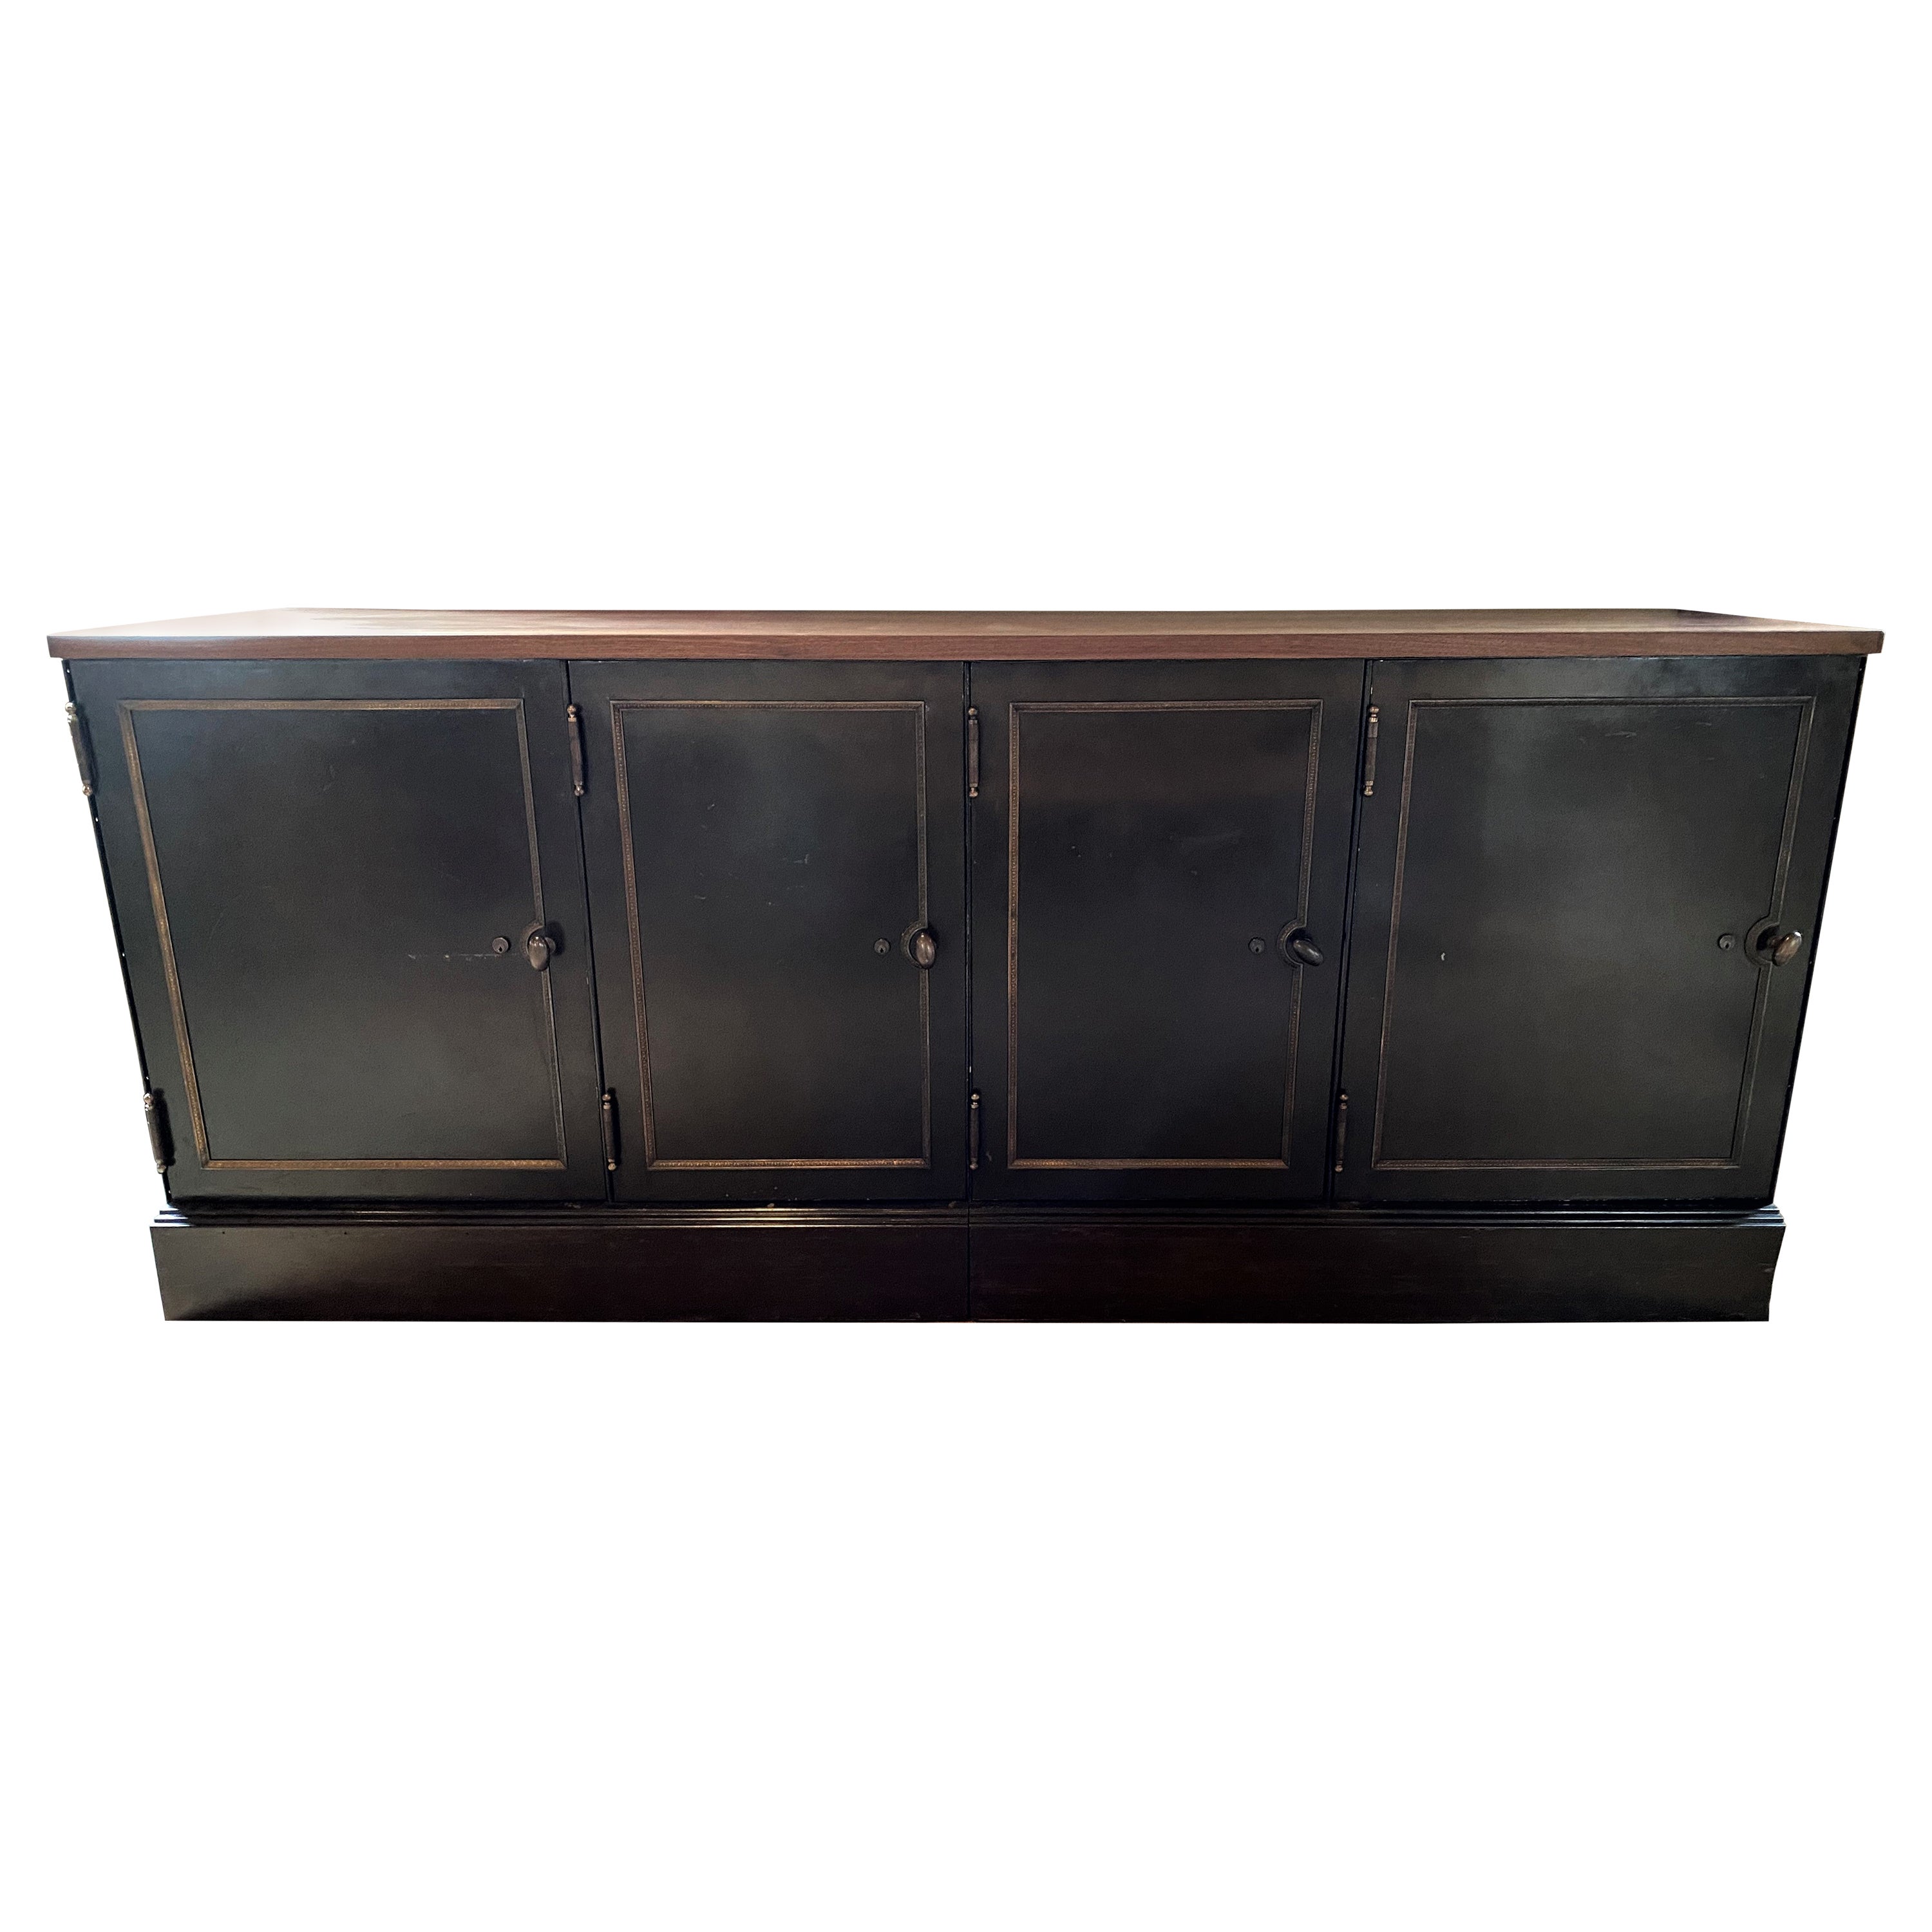 Executive Steel Cabinet For Sale